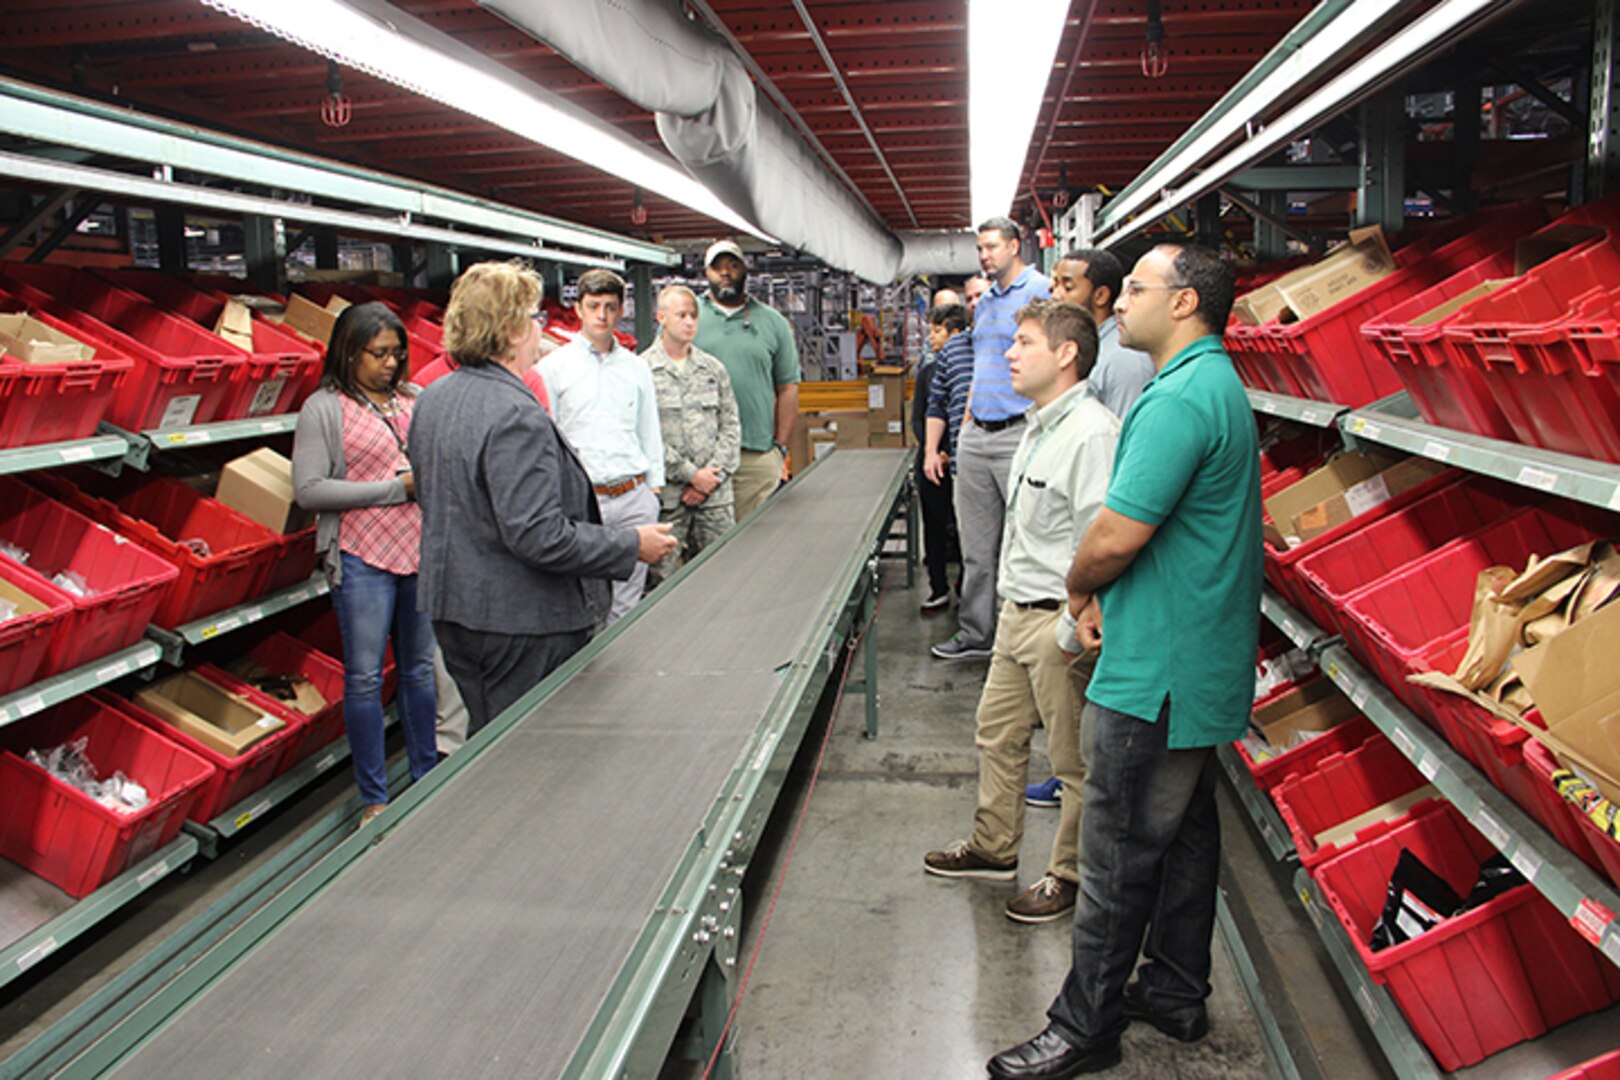 Sherre Mitten-Bell (left in gray), DLA Distribution Susquehanna public affairs officer, shows DLA Troop Support Industrial Hardware employees, the “pick and pack” area at the warehouse facility in New Cumberland, Pennsylvania during a visit Sept. 16. DLA IH employees visited the warehouse to get a better understanding of the process of getting material to the warfighter once the contract is awarded.